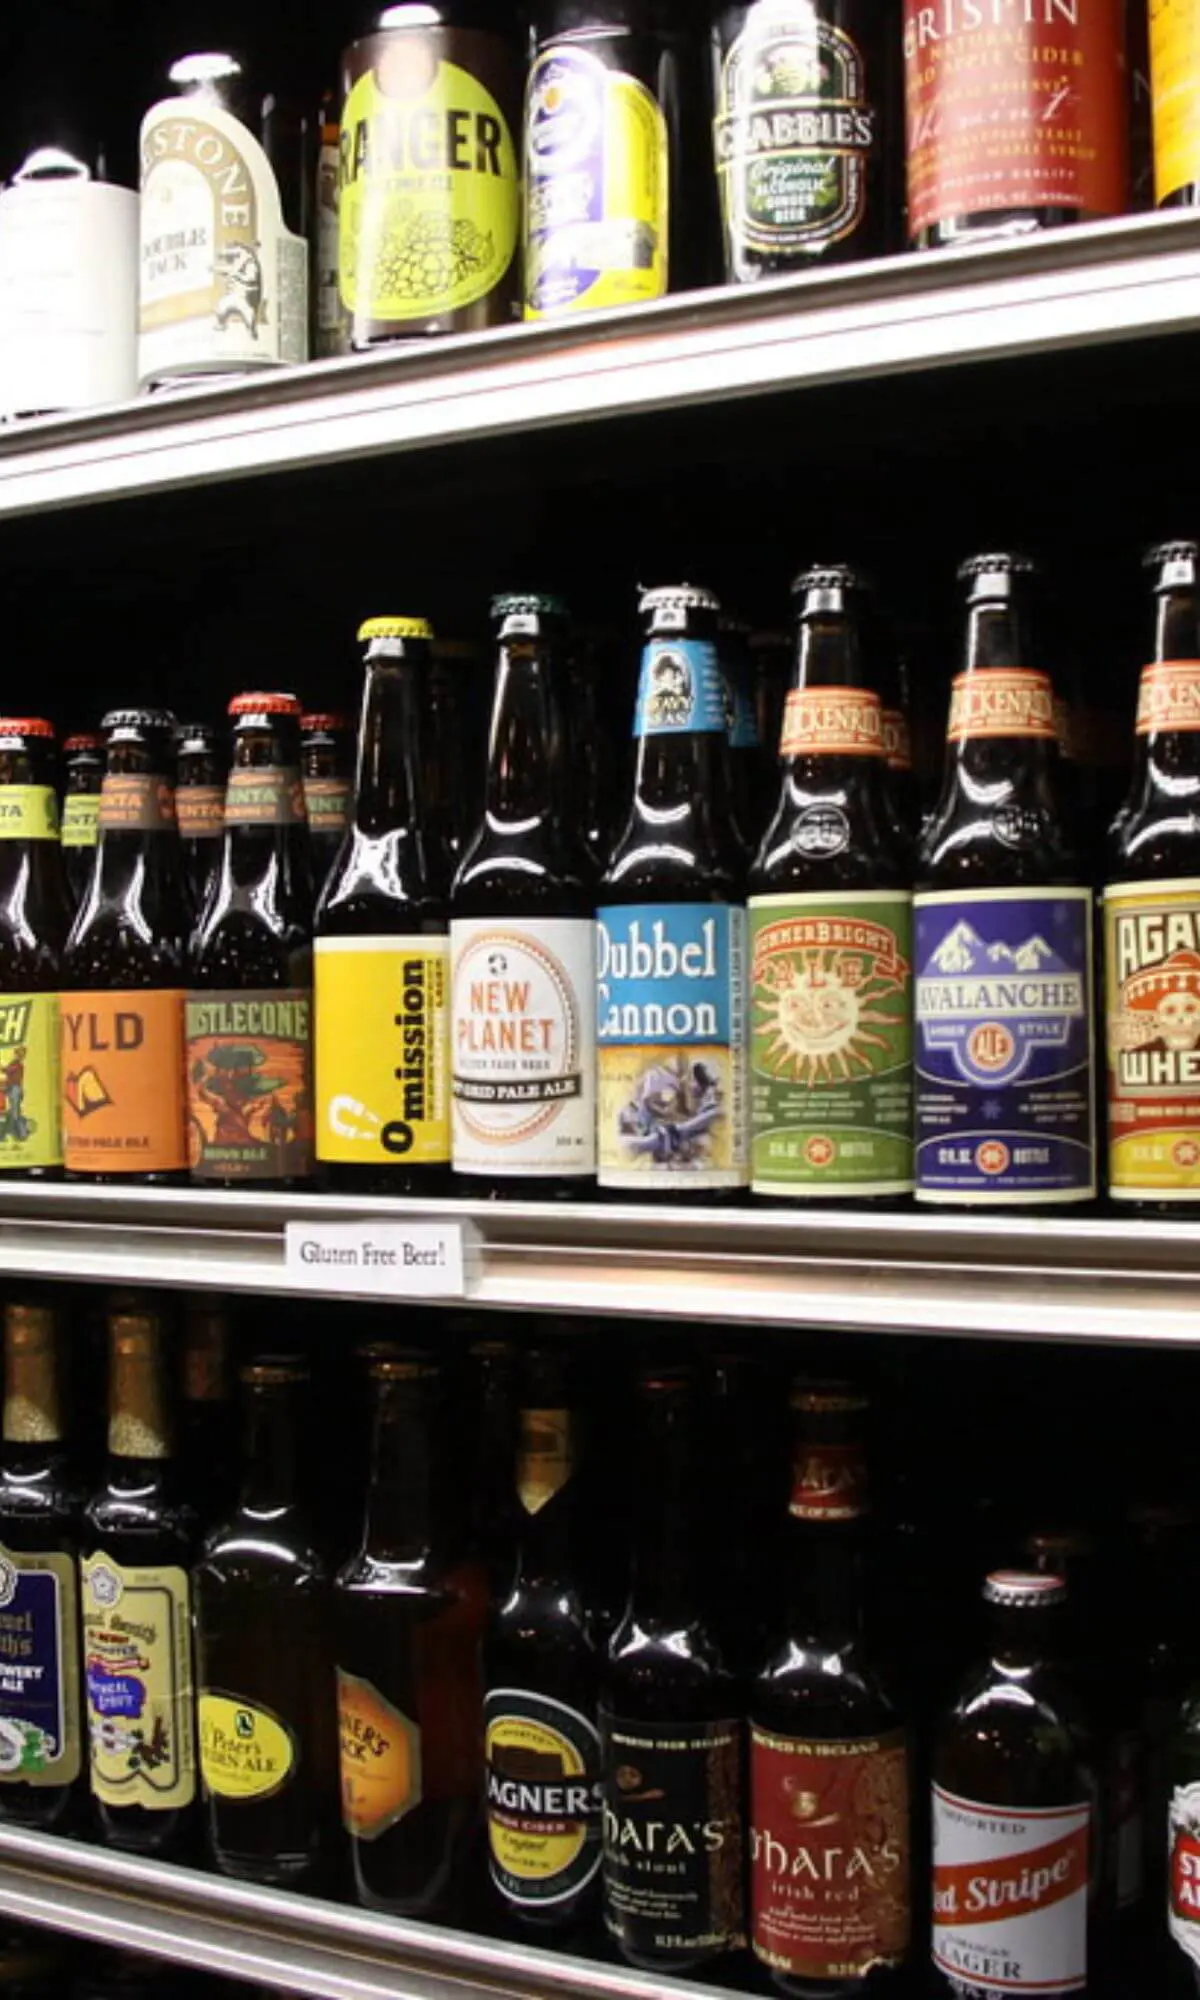 Gluten free beers, including omission on a store shelf.